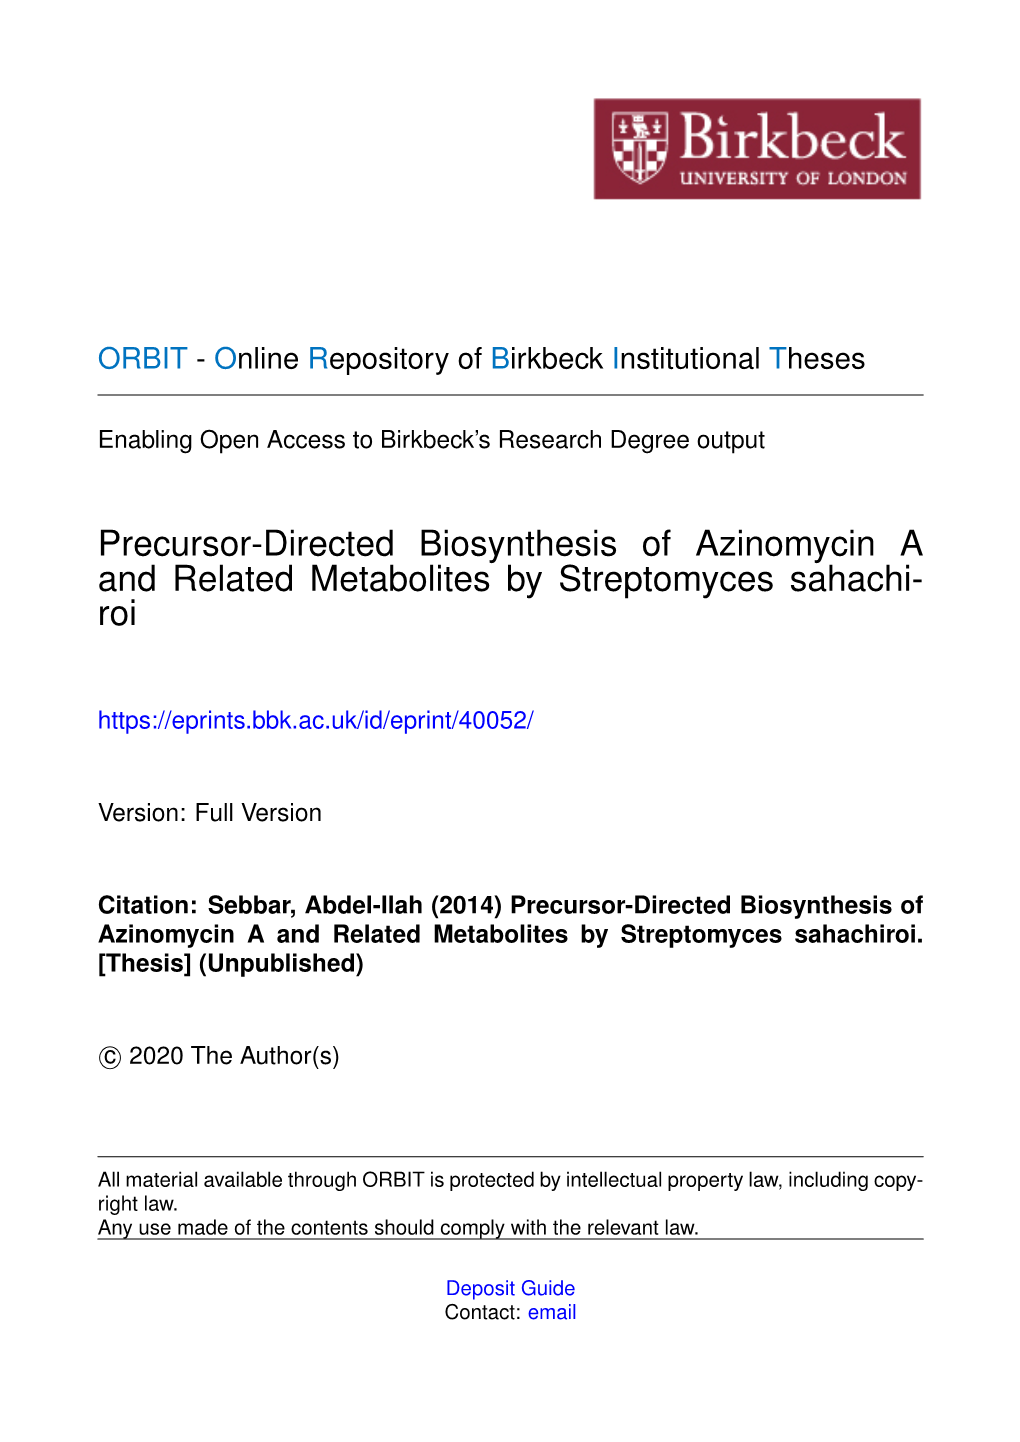 Precursor-Directed Biosynthesis of Azinomycin a and Related Metabolites by Streptomyces Sahachi- Roi